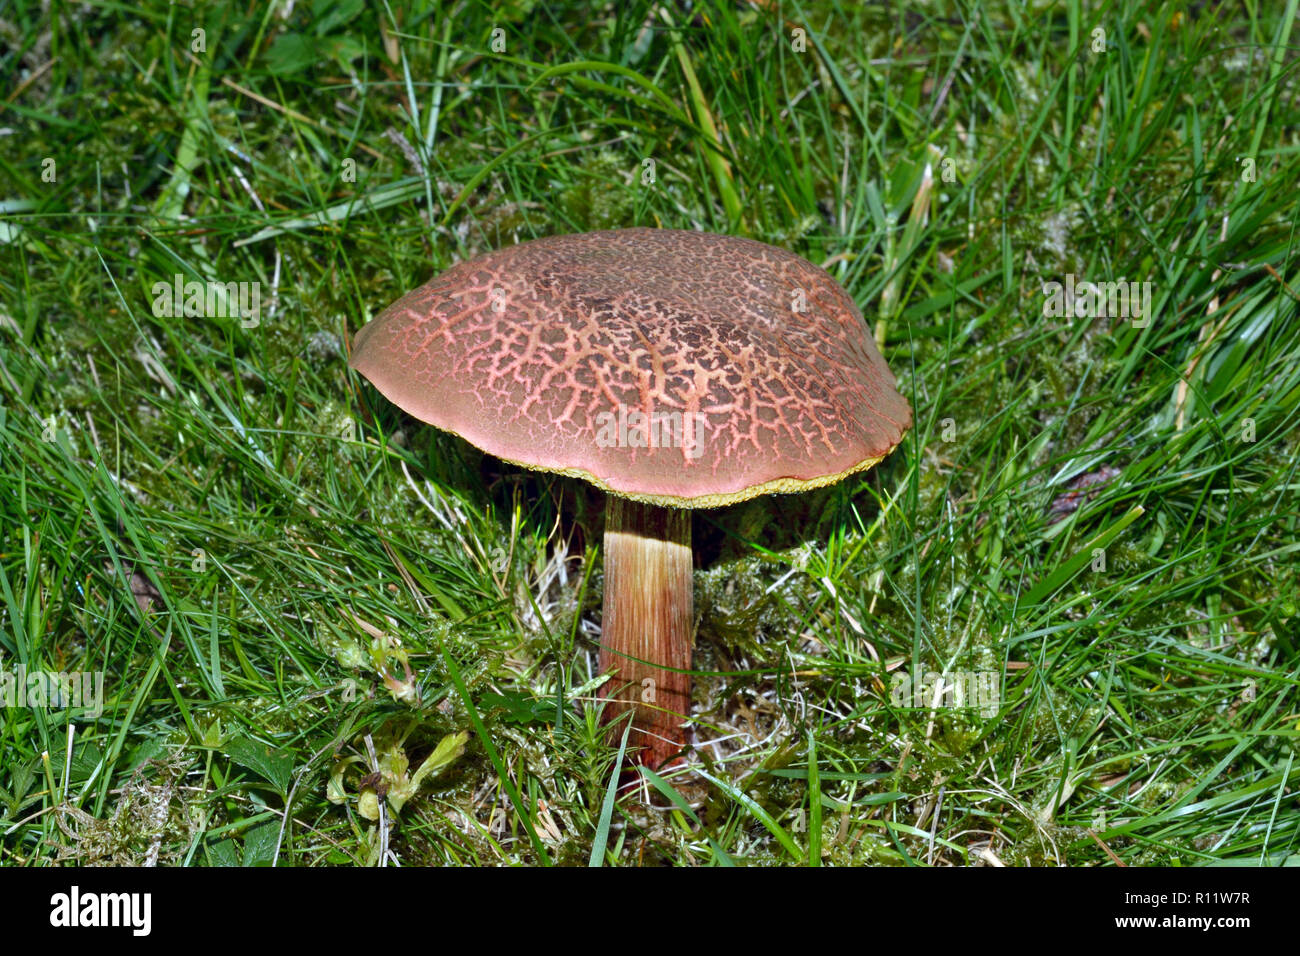 Xerocomellus chrysenteron is an edible mushroom found in hardwood and conifer forests in northern temperate zones. Stock Photo